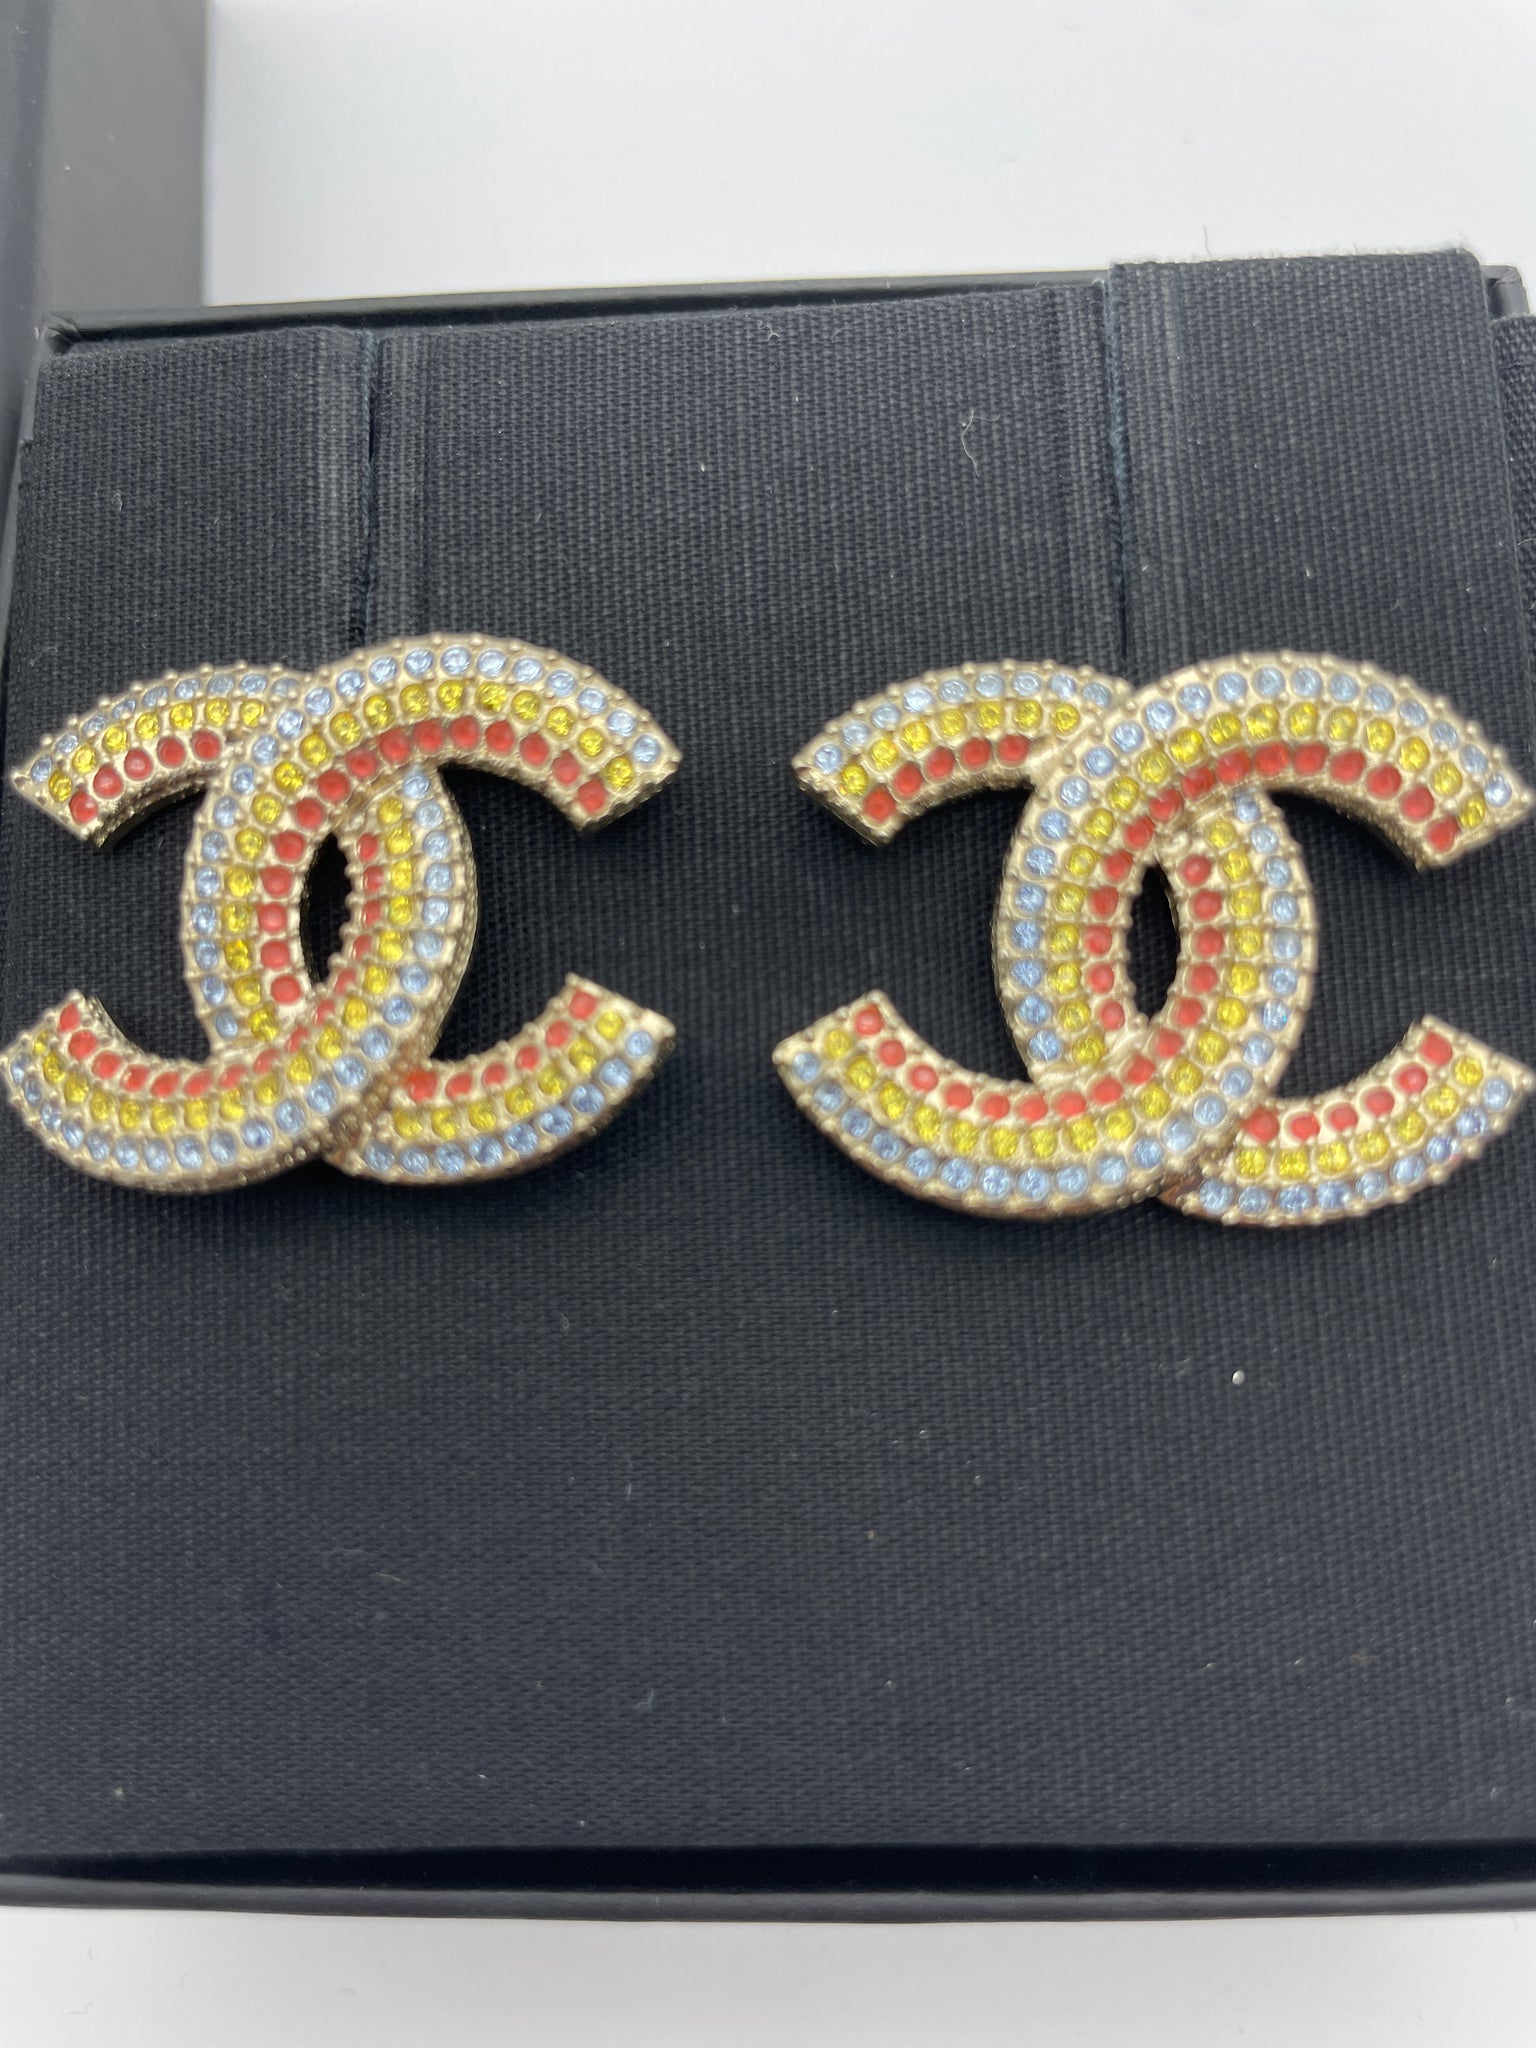 CHANEL, Jewelry, In Stores Chanel 23c Cc Gold Tone Multicolor Cha Nel  Crystal Drop Earrings